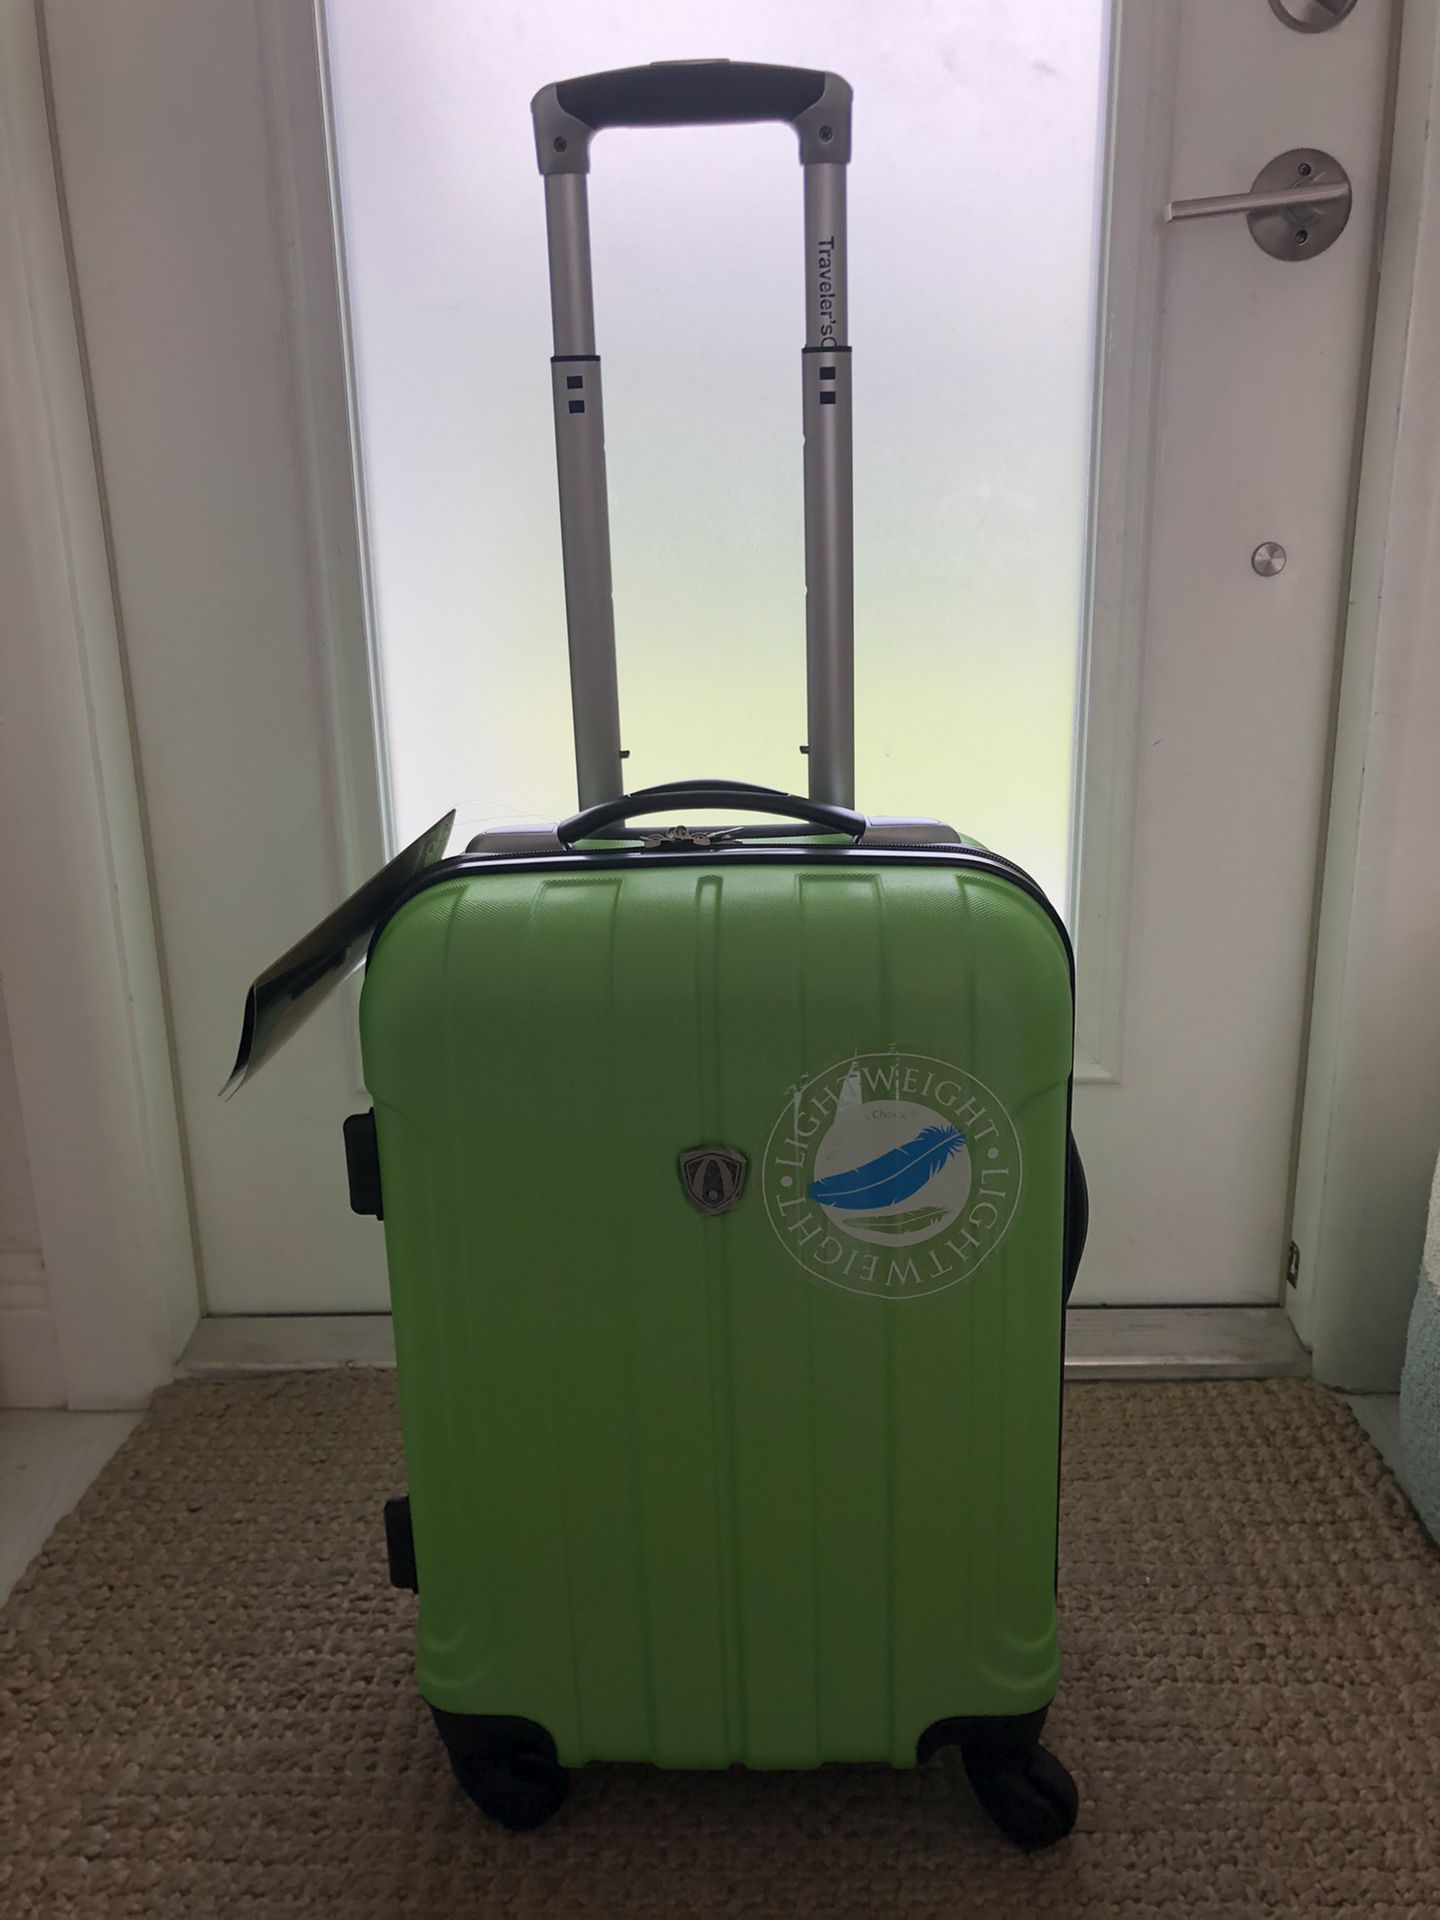 Carry-on lightweight spinner suitcase